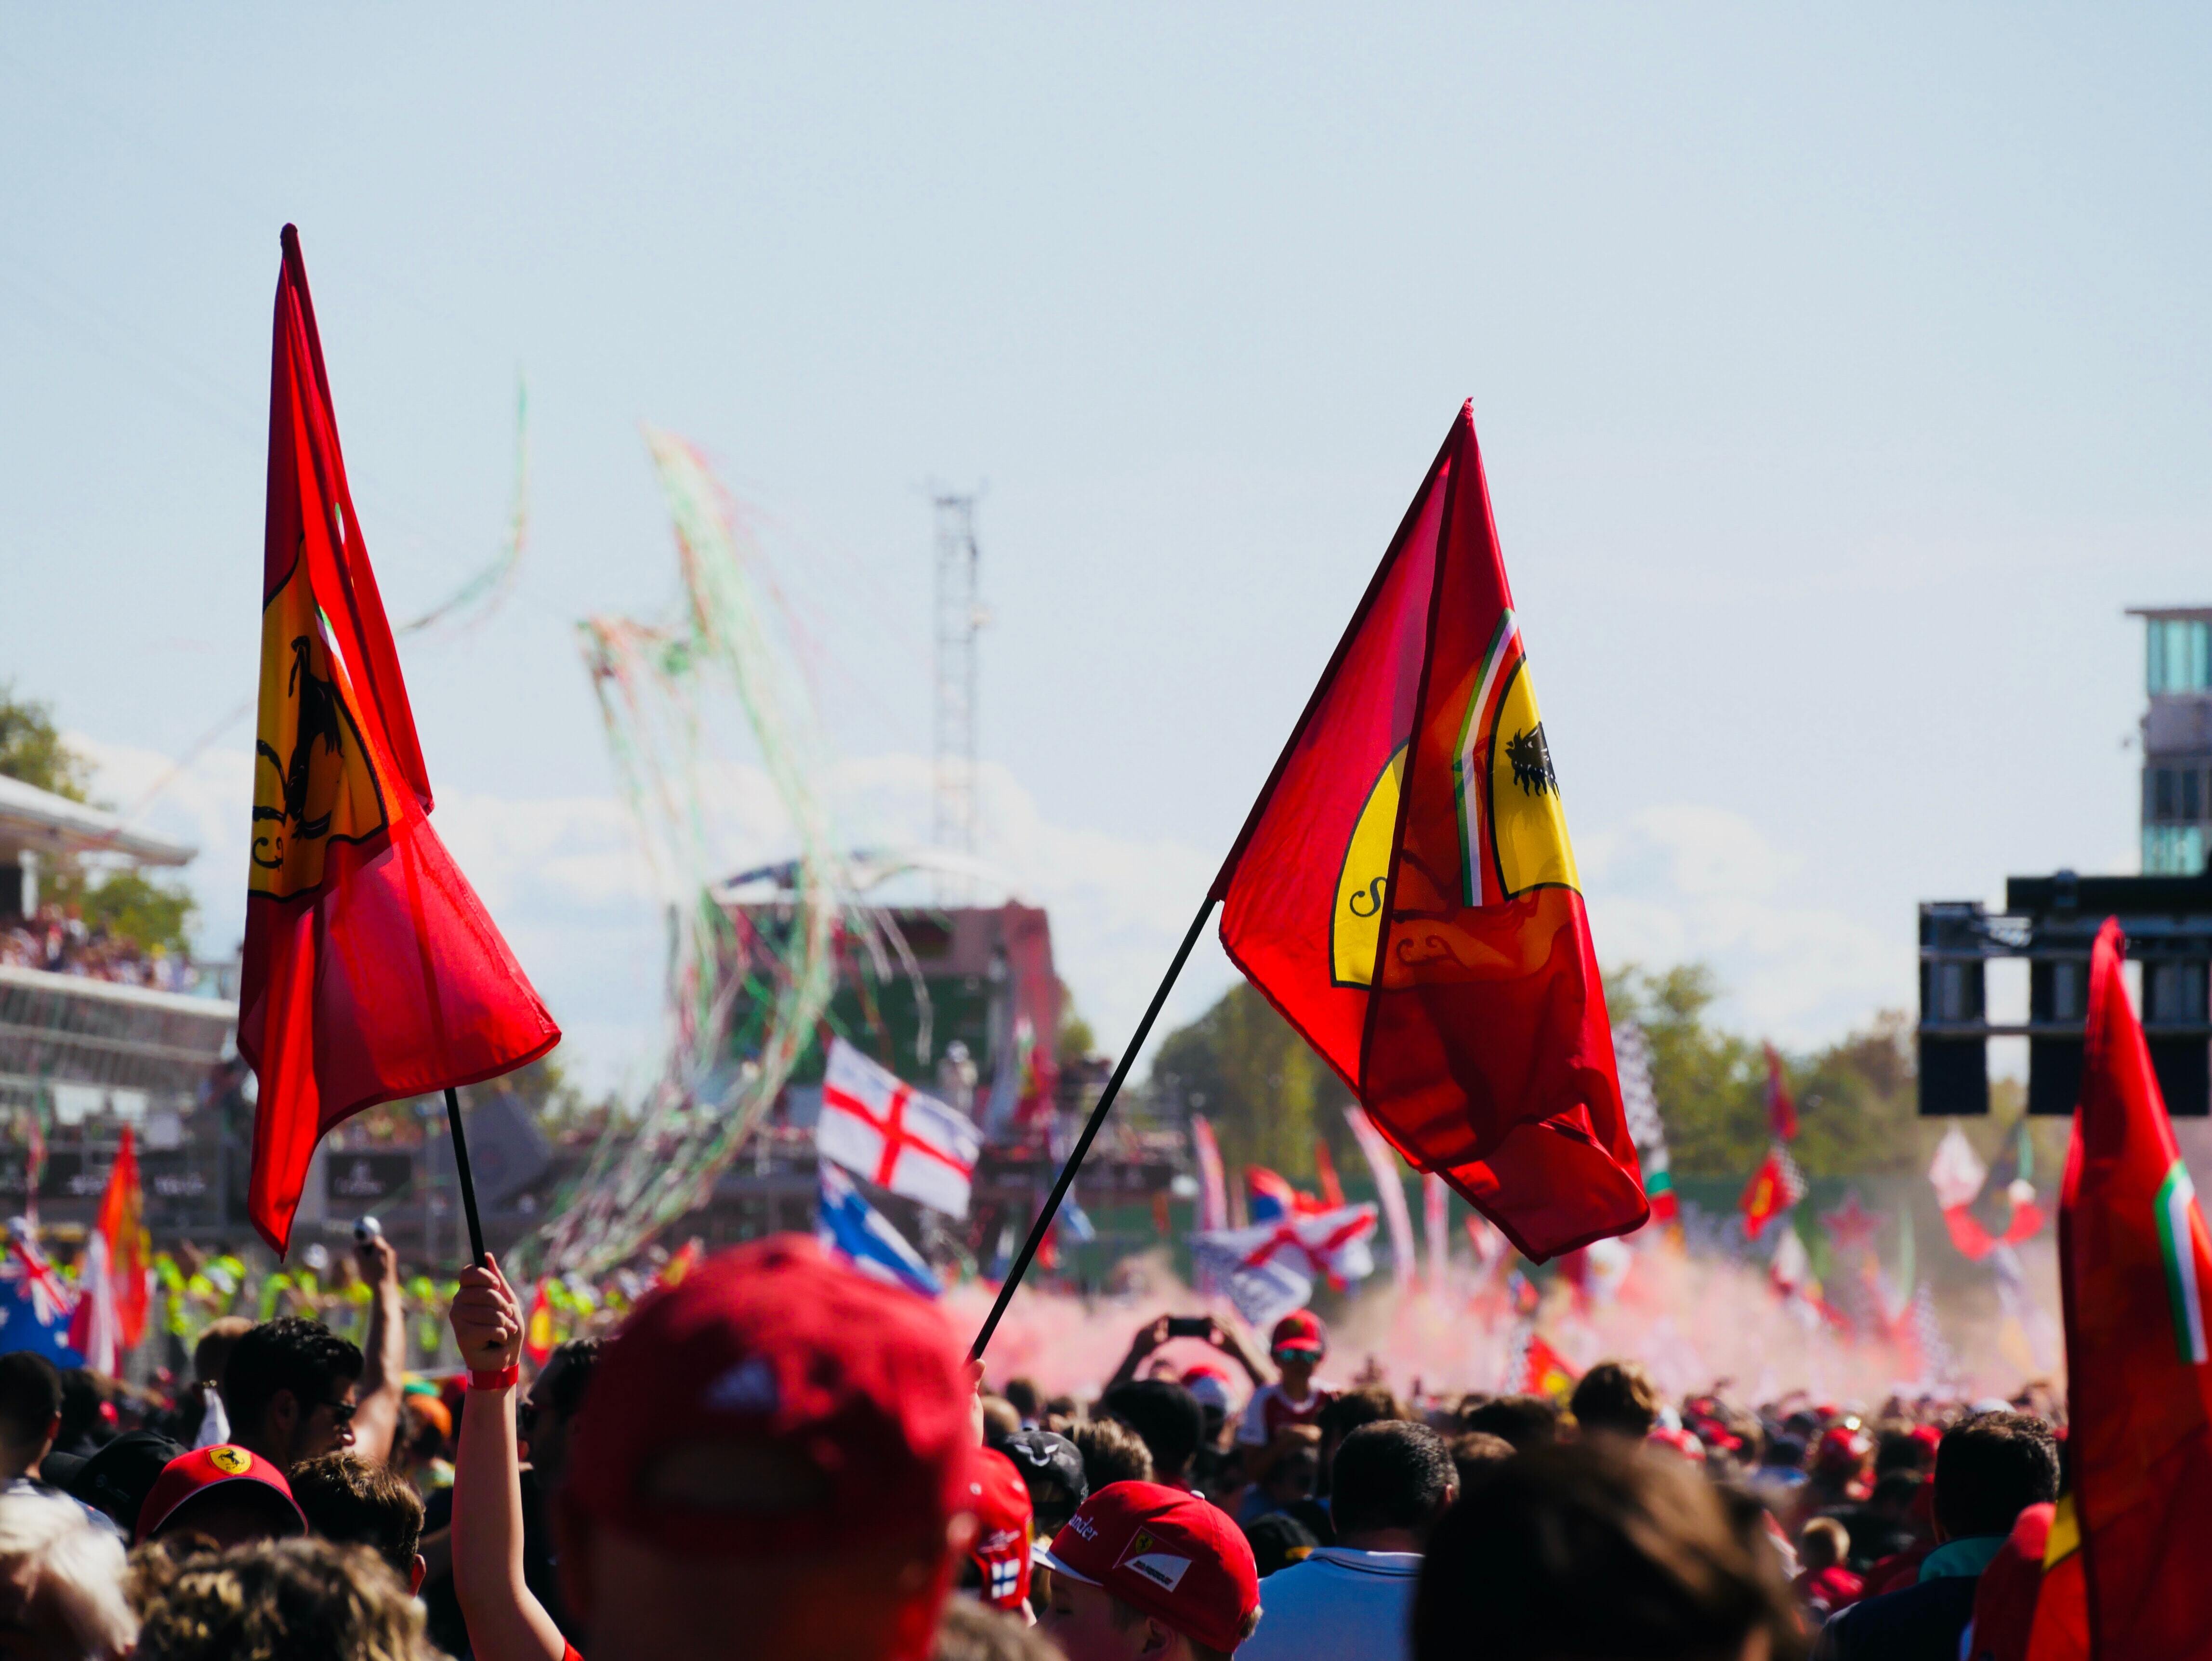 Ferrari fans look on at the podium celebrations at Monza